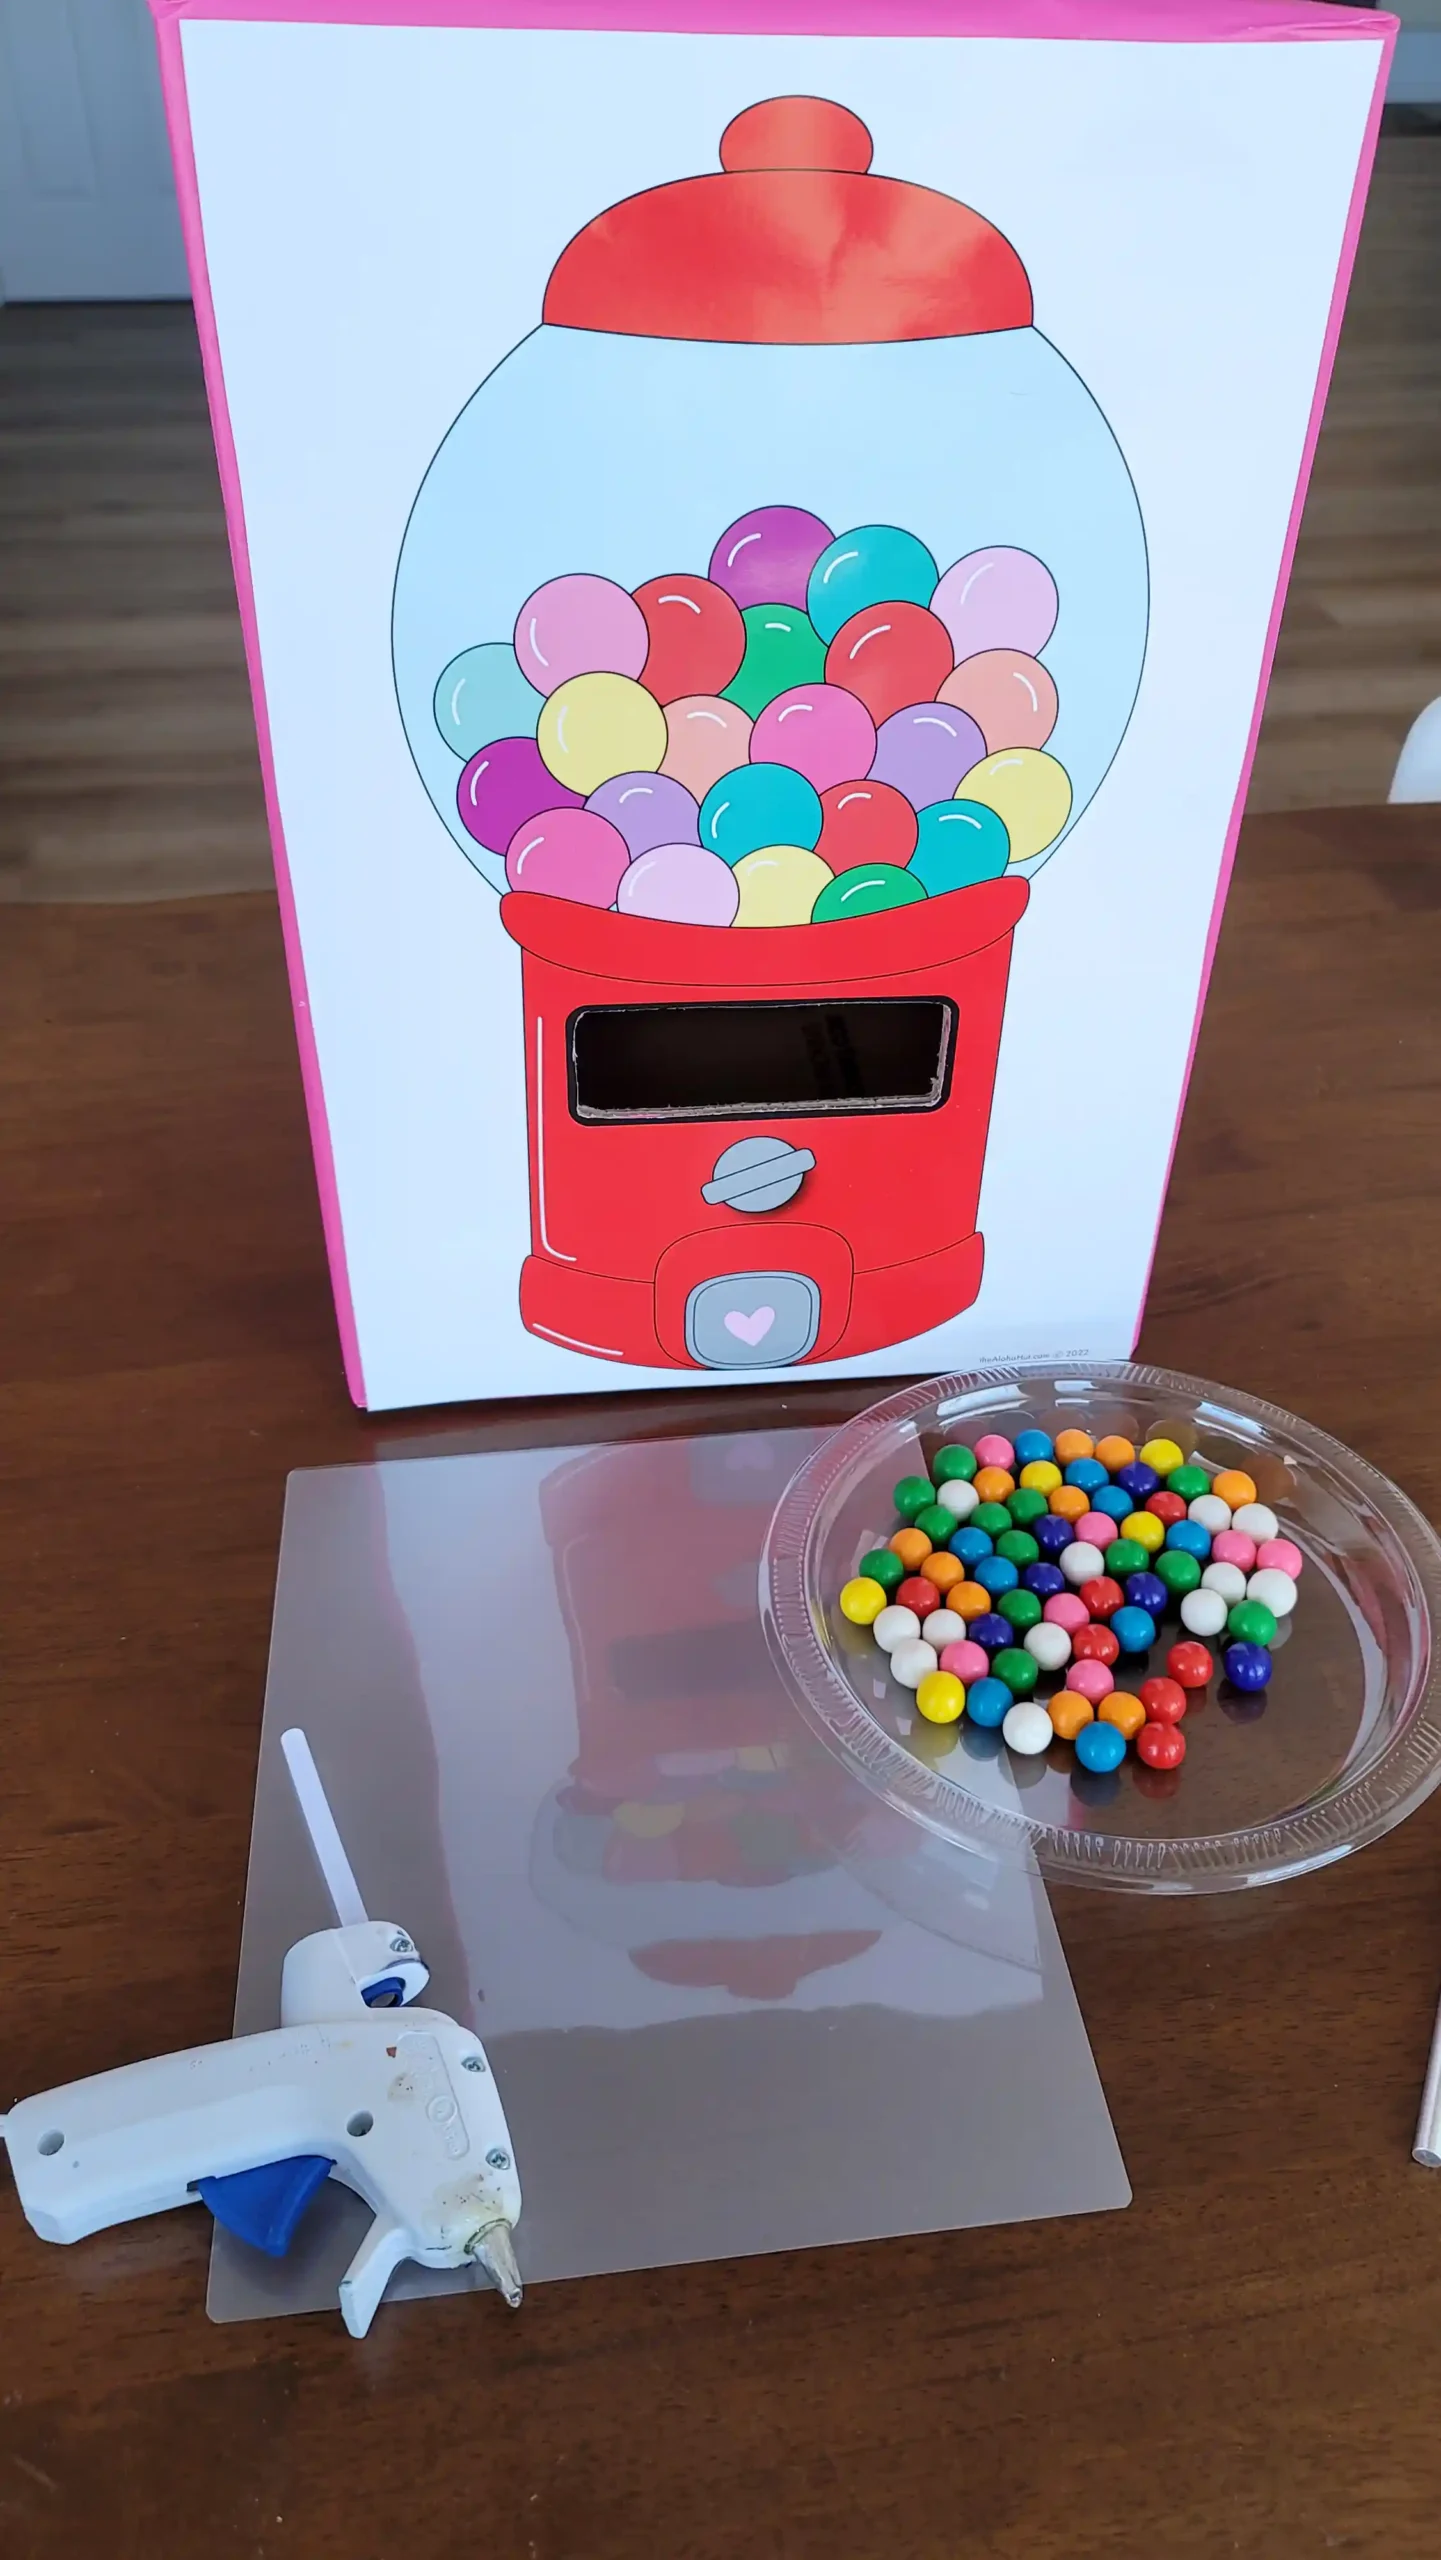 How to make a Valentine's Day gumball machine box for kids. Includes step by step instruction with a printable red or pink gumball machine, all the supplies you need to make a DIY homemade valentine box!